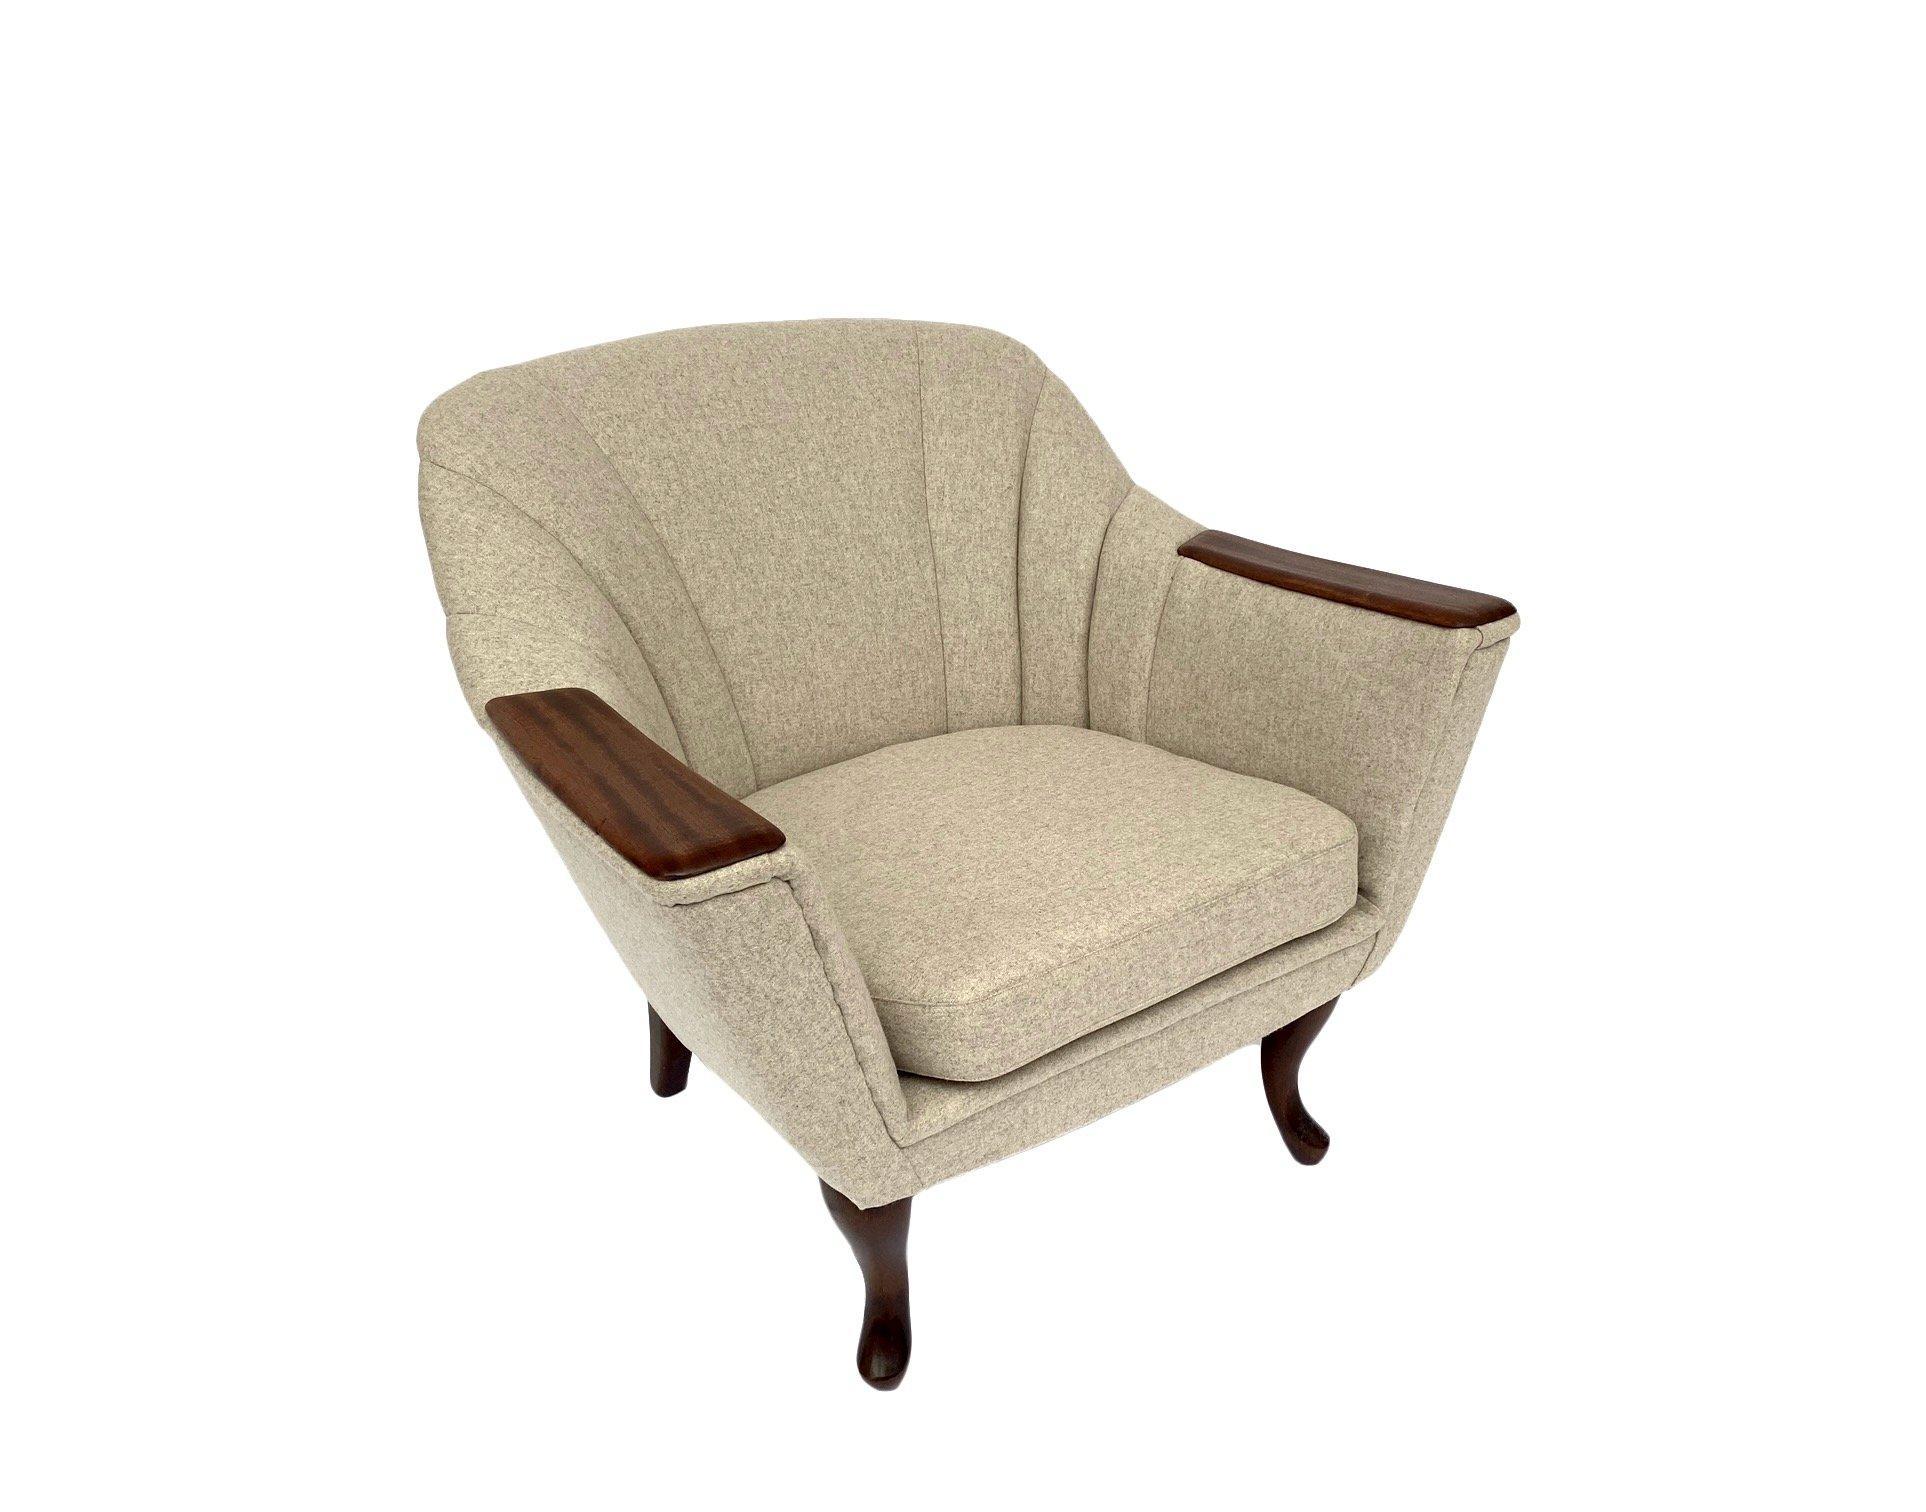 A beautiful Danish scalloped cream wool and teak armchair, this would make a stylish addition to any living or work area.

The chair has a wide seat and padded backrest for enhanced comfort. A striking piece of classic Scandinavian furniture.

The